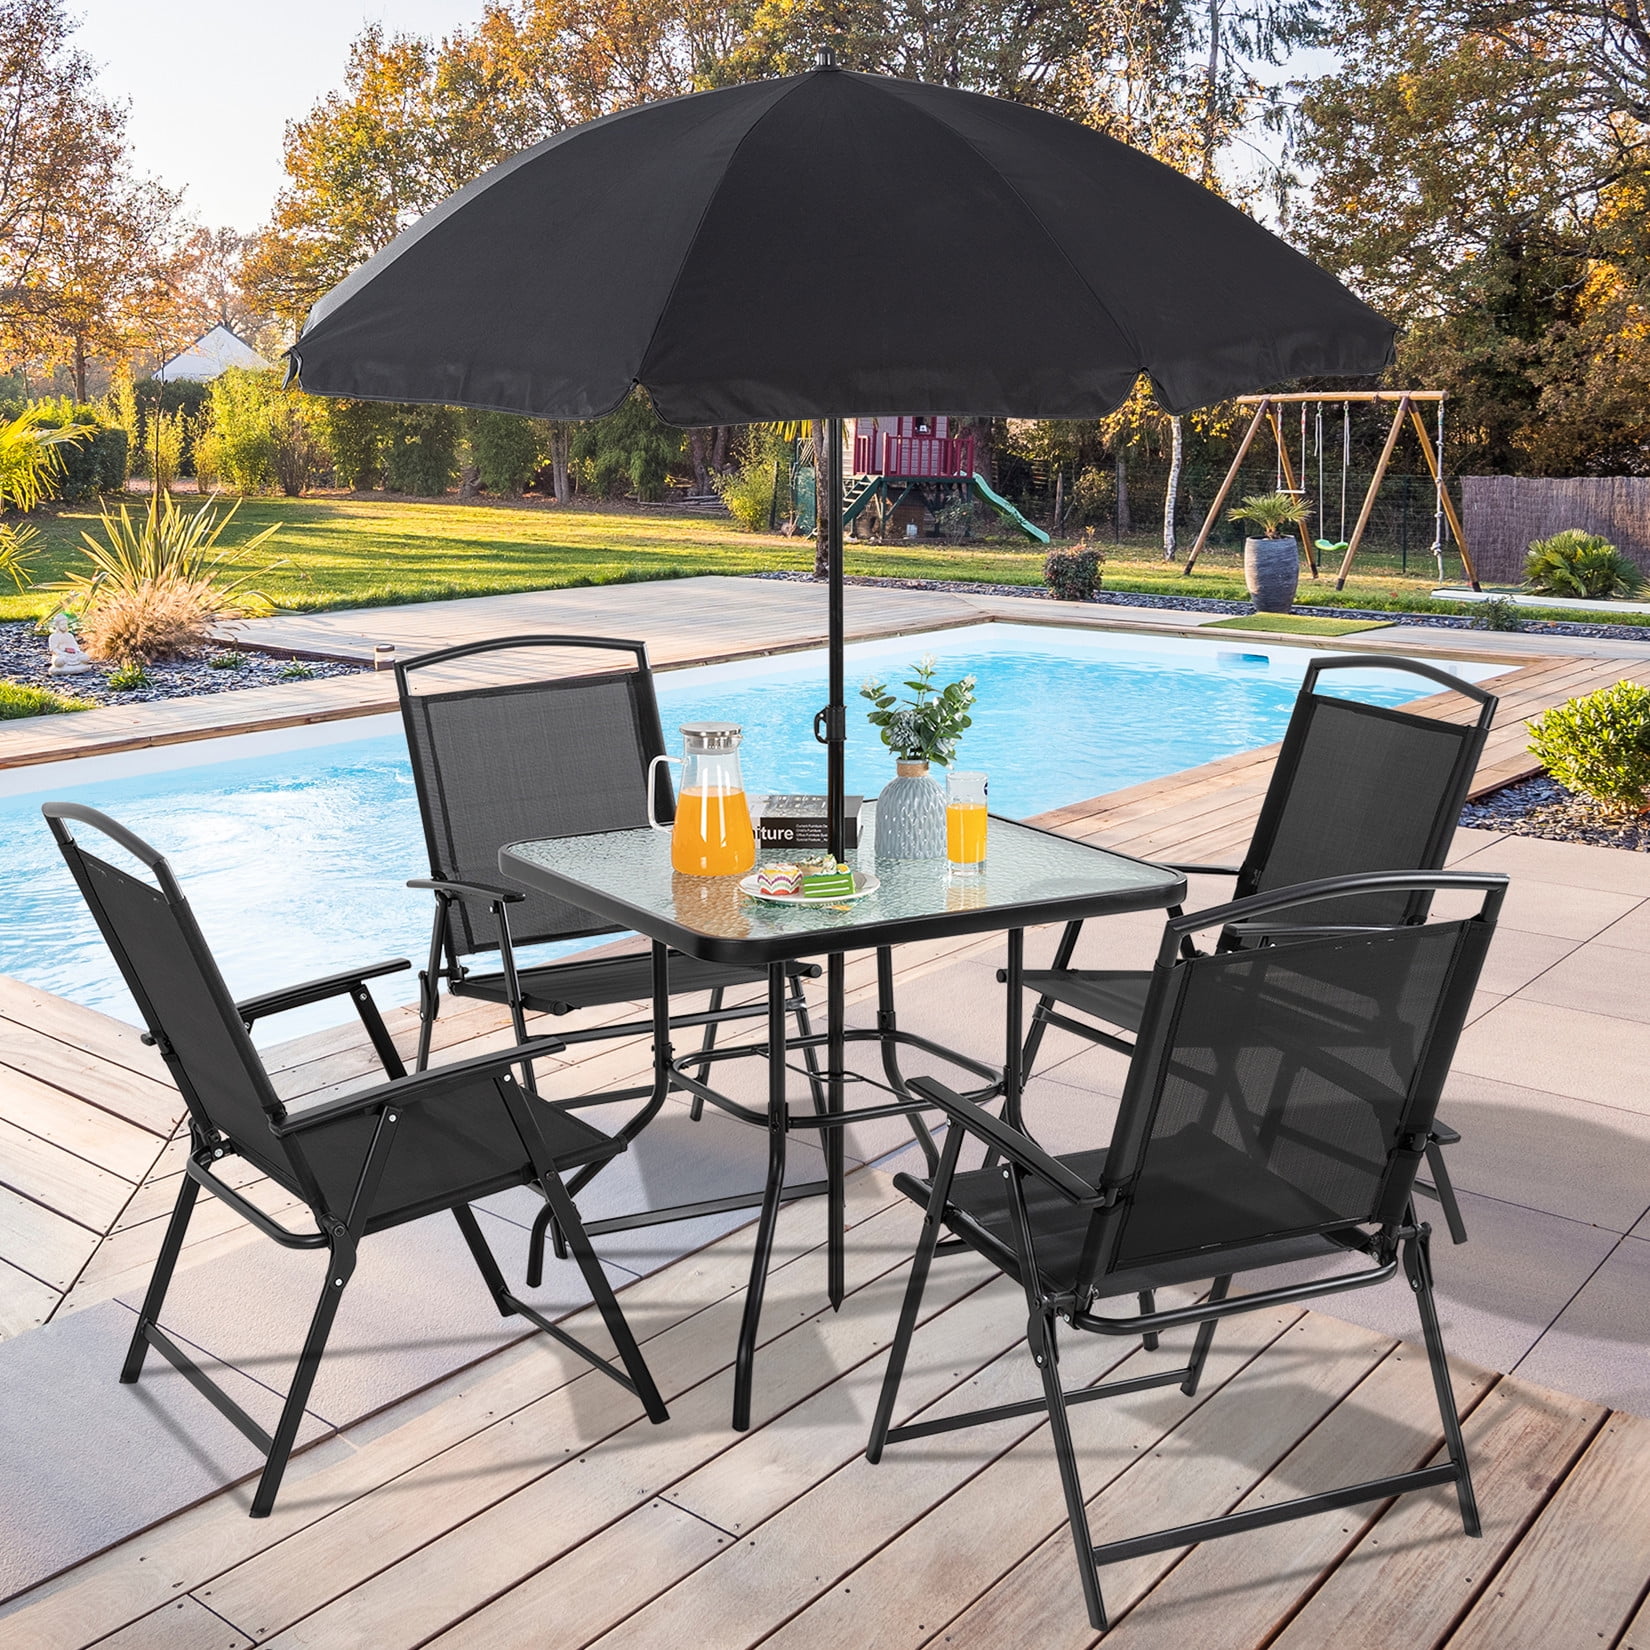 Garden Patio Furniture Set 4 Seater Dining Set Parasol Glass Table And Chairs 